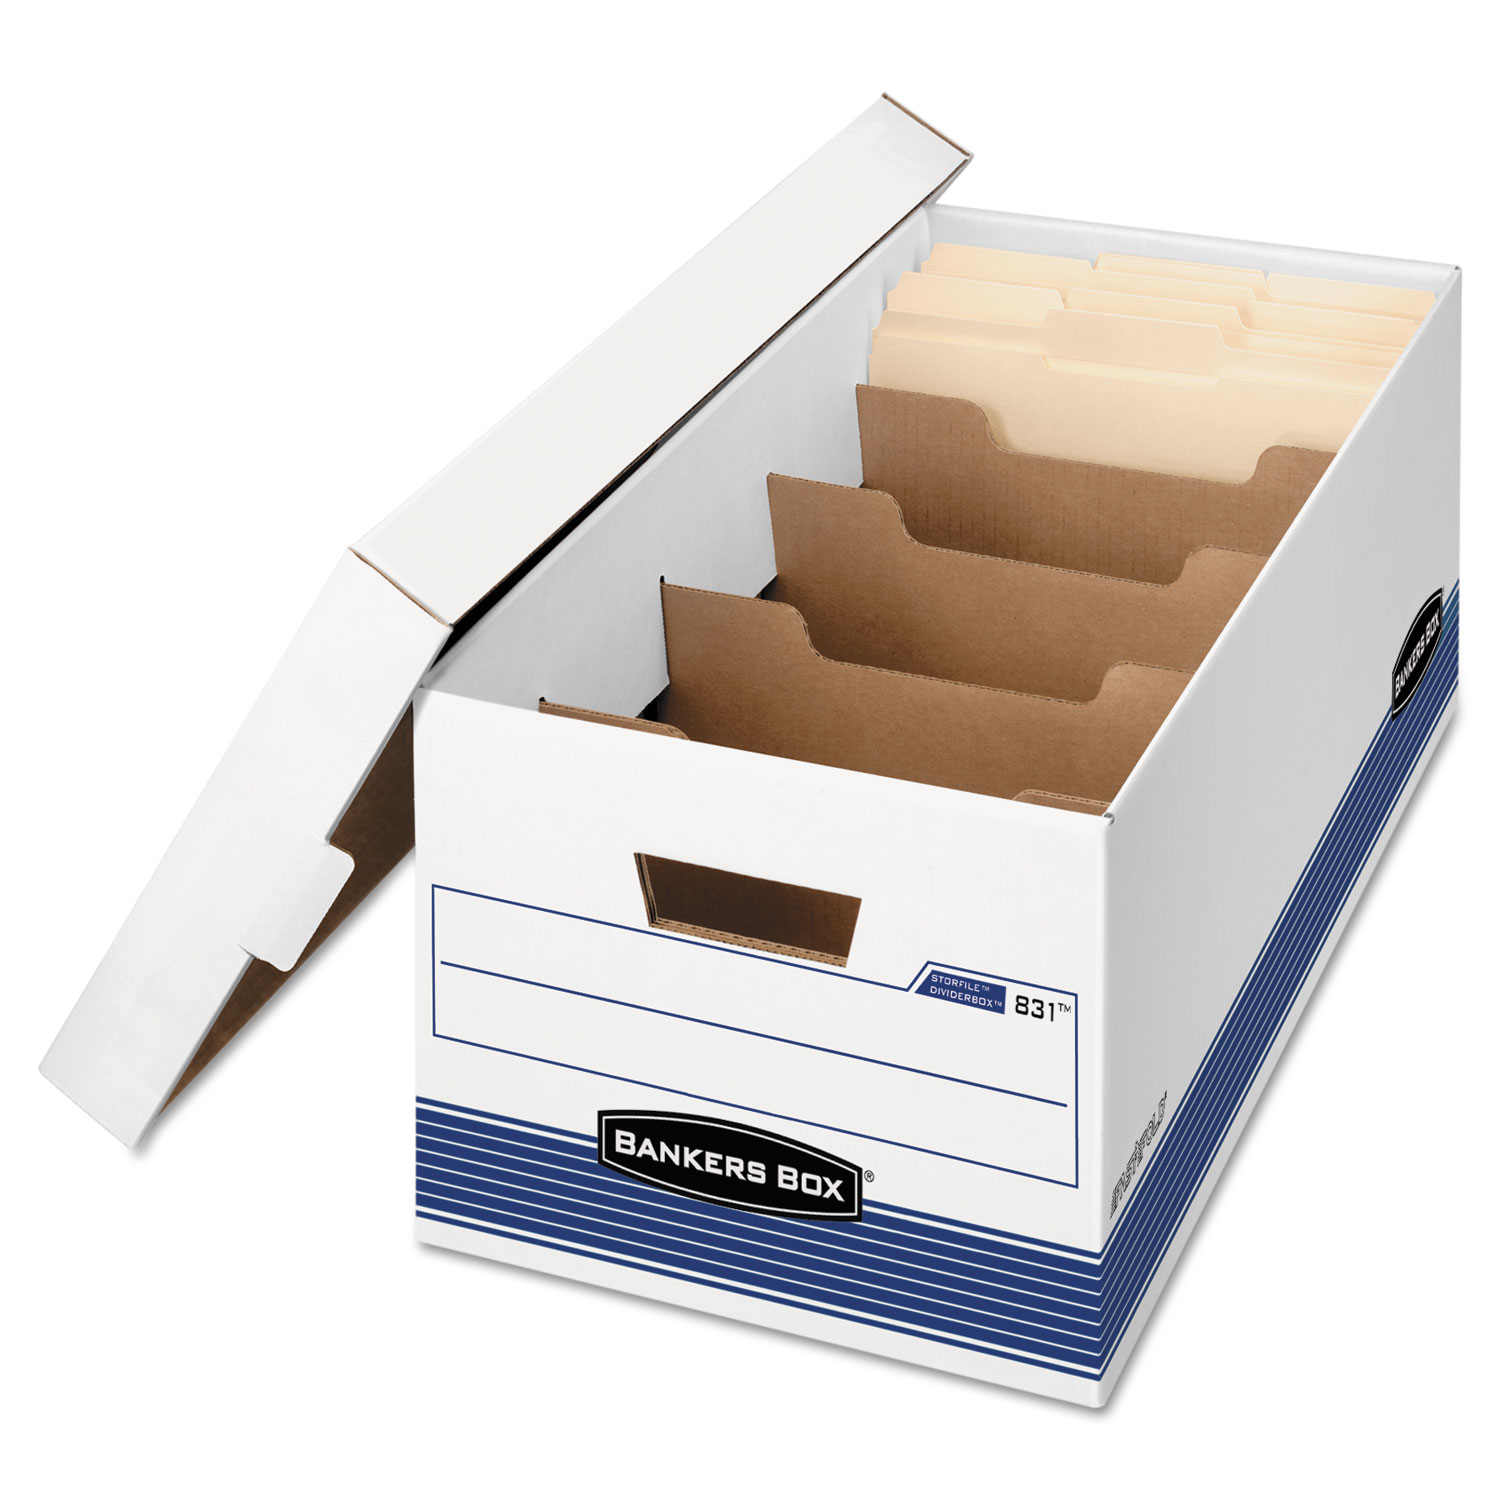  Bankers Box 0083101 STOR/FILE Medium-Duty Storage Boxes with Dividers, Letter Files, 12.88 x 25.38 x 10.25, White/Blue, 12/Carton (FEL0083101) 